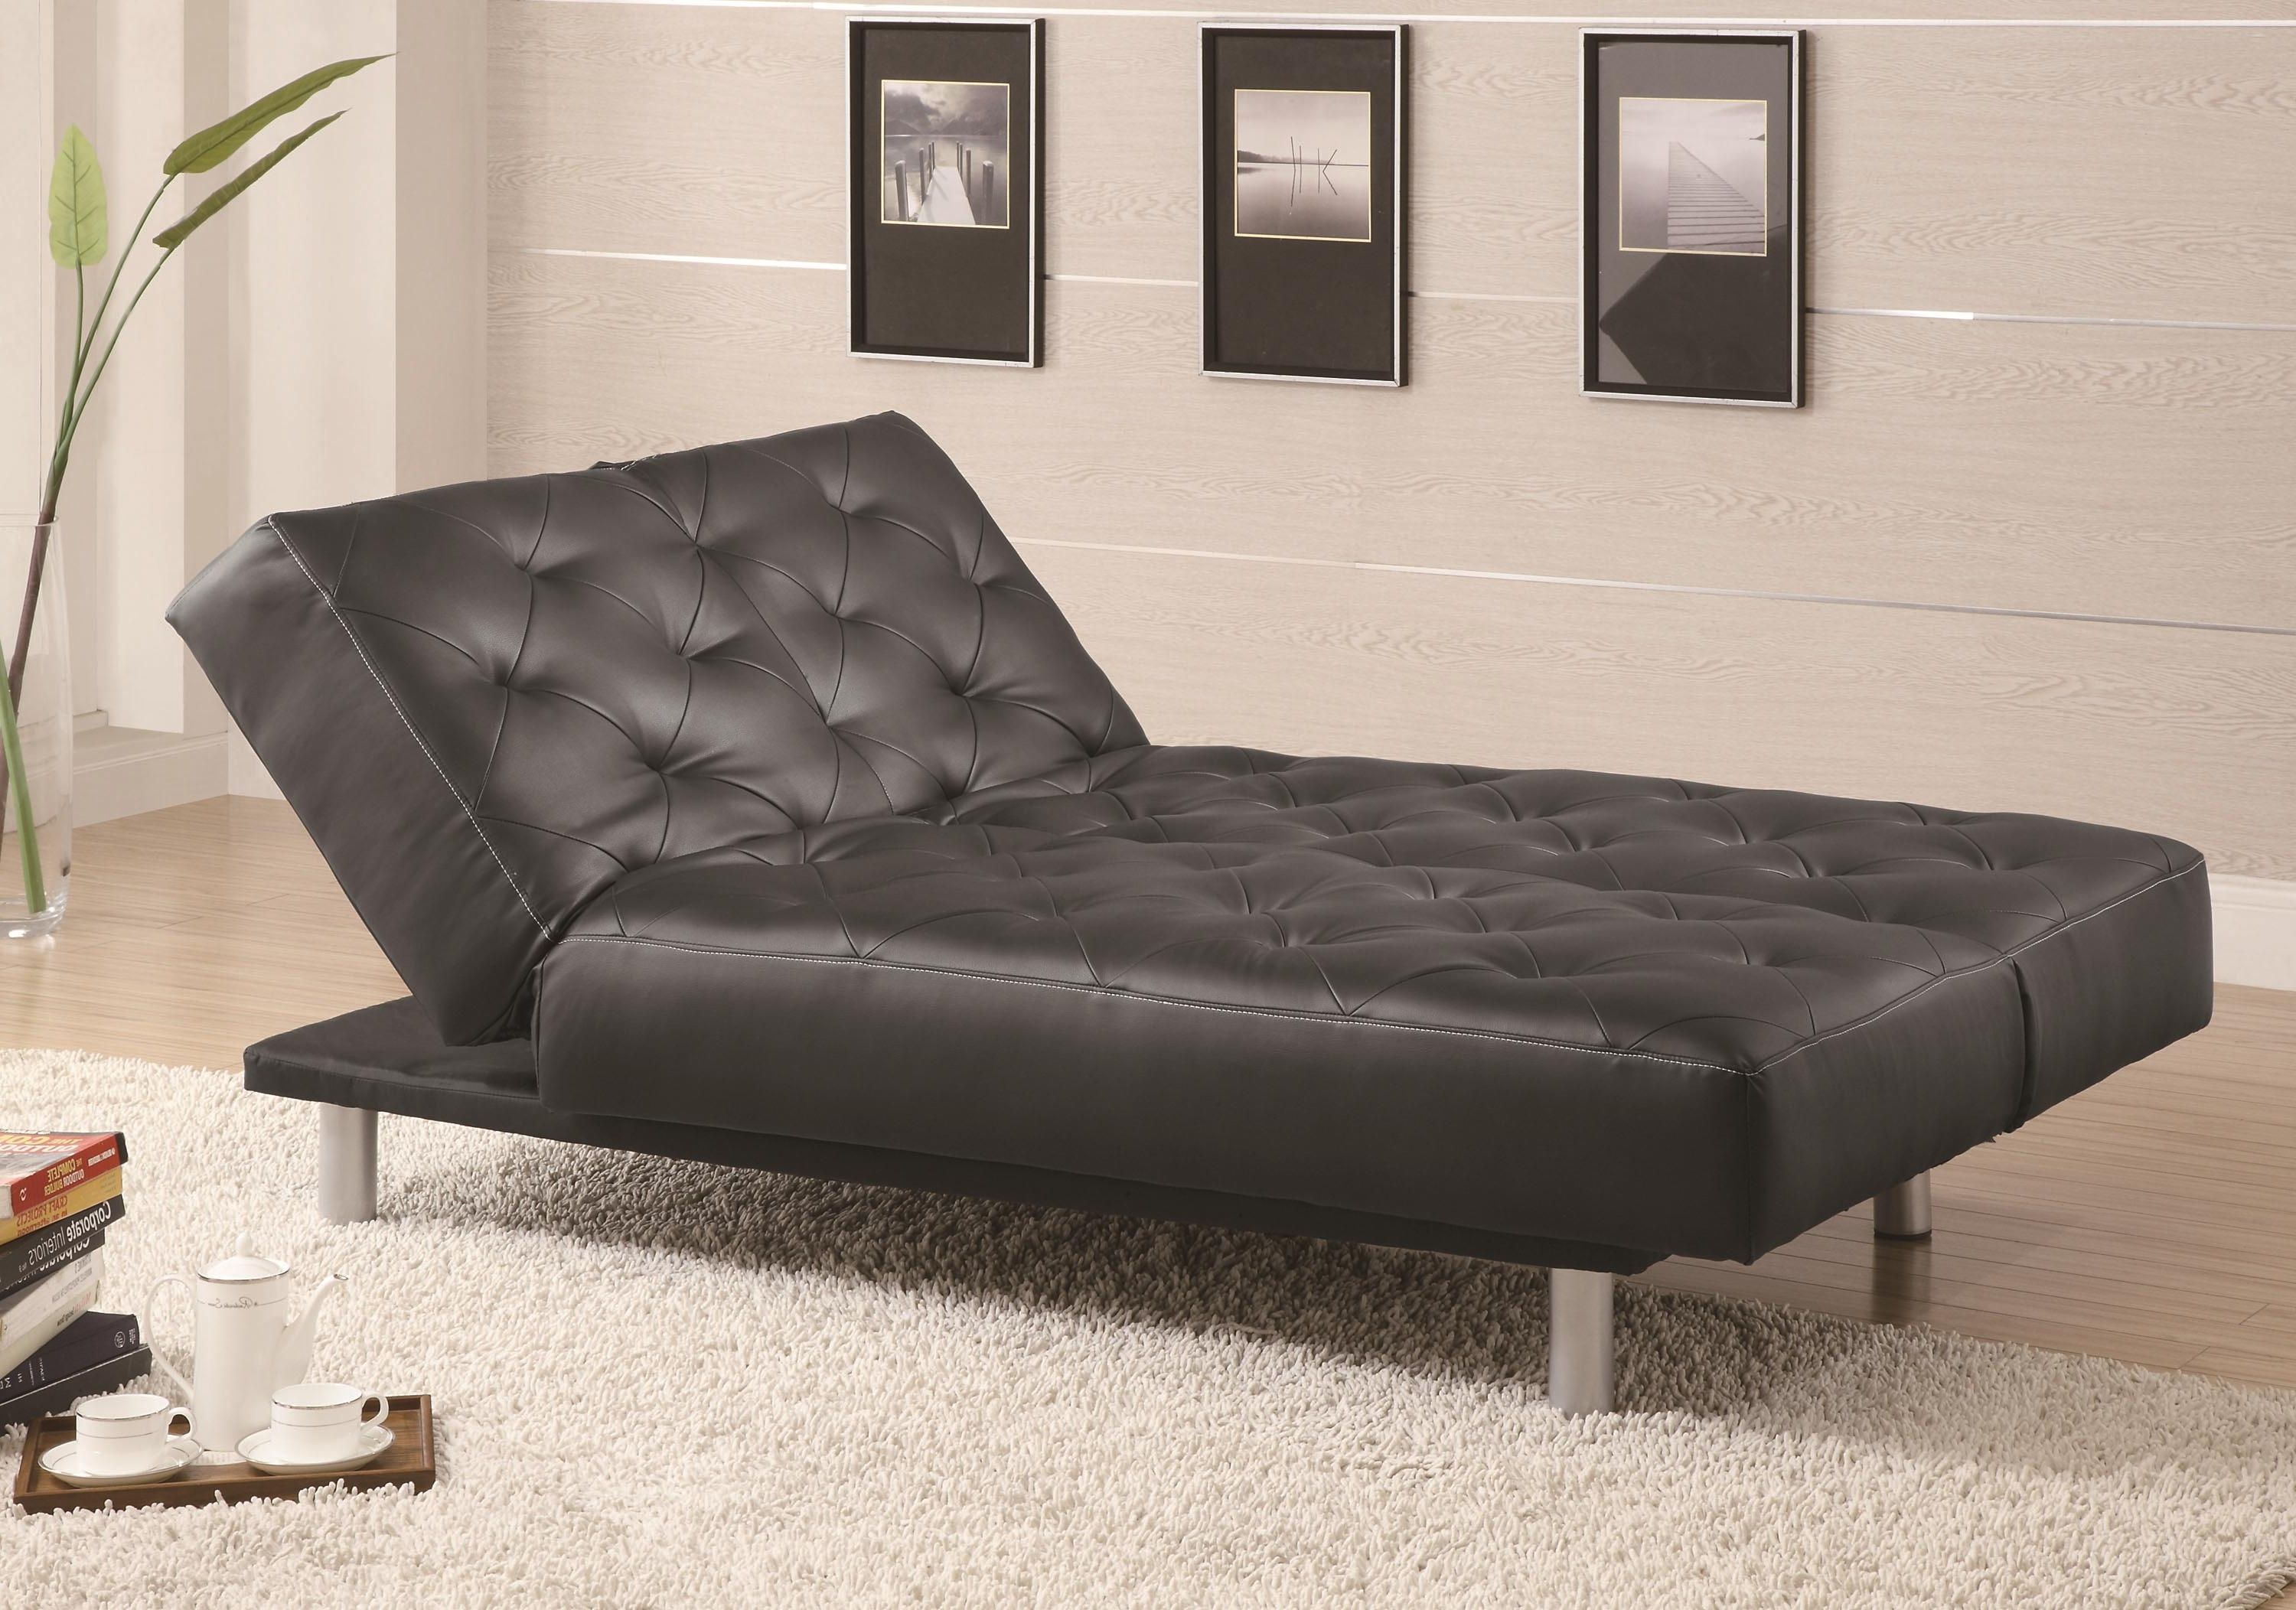 Black Leather Chaises Inside Most Current Oversized Black Leather Tufted Chaise Lounge With Chrome Legs (View 13 of 15)